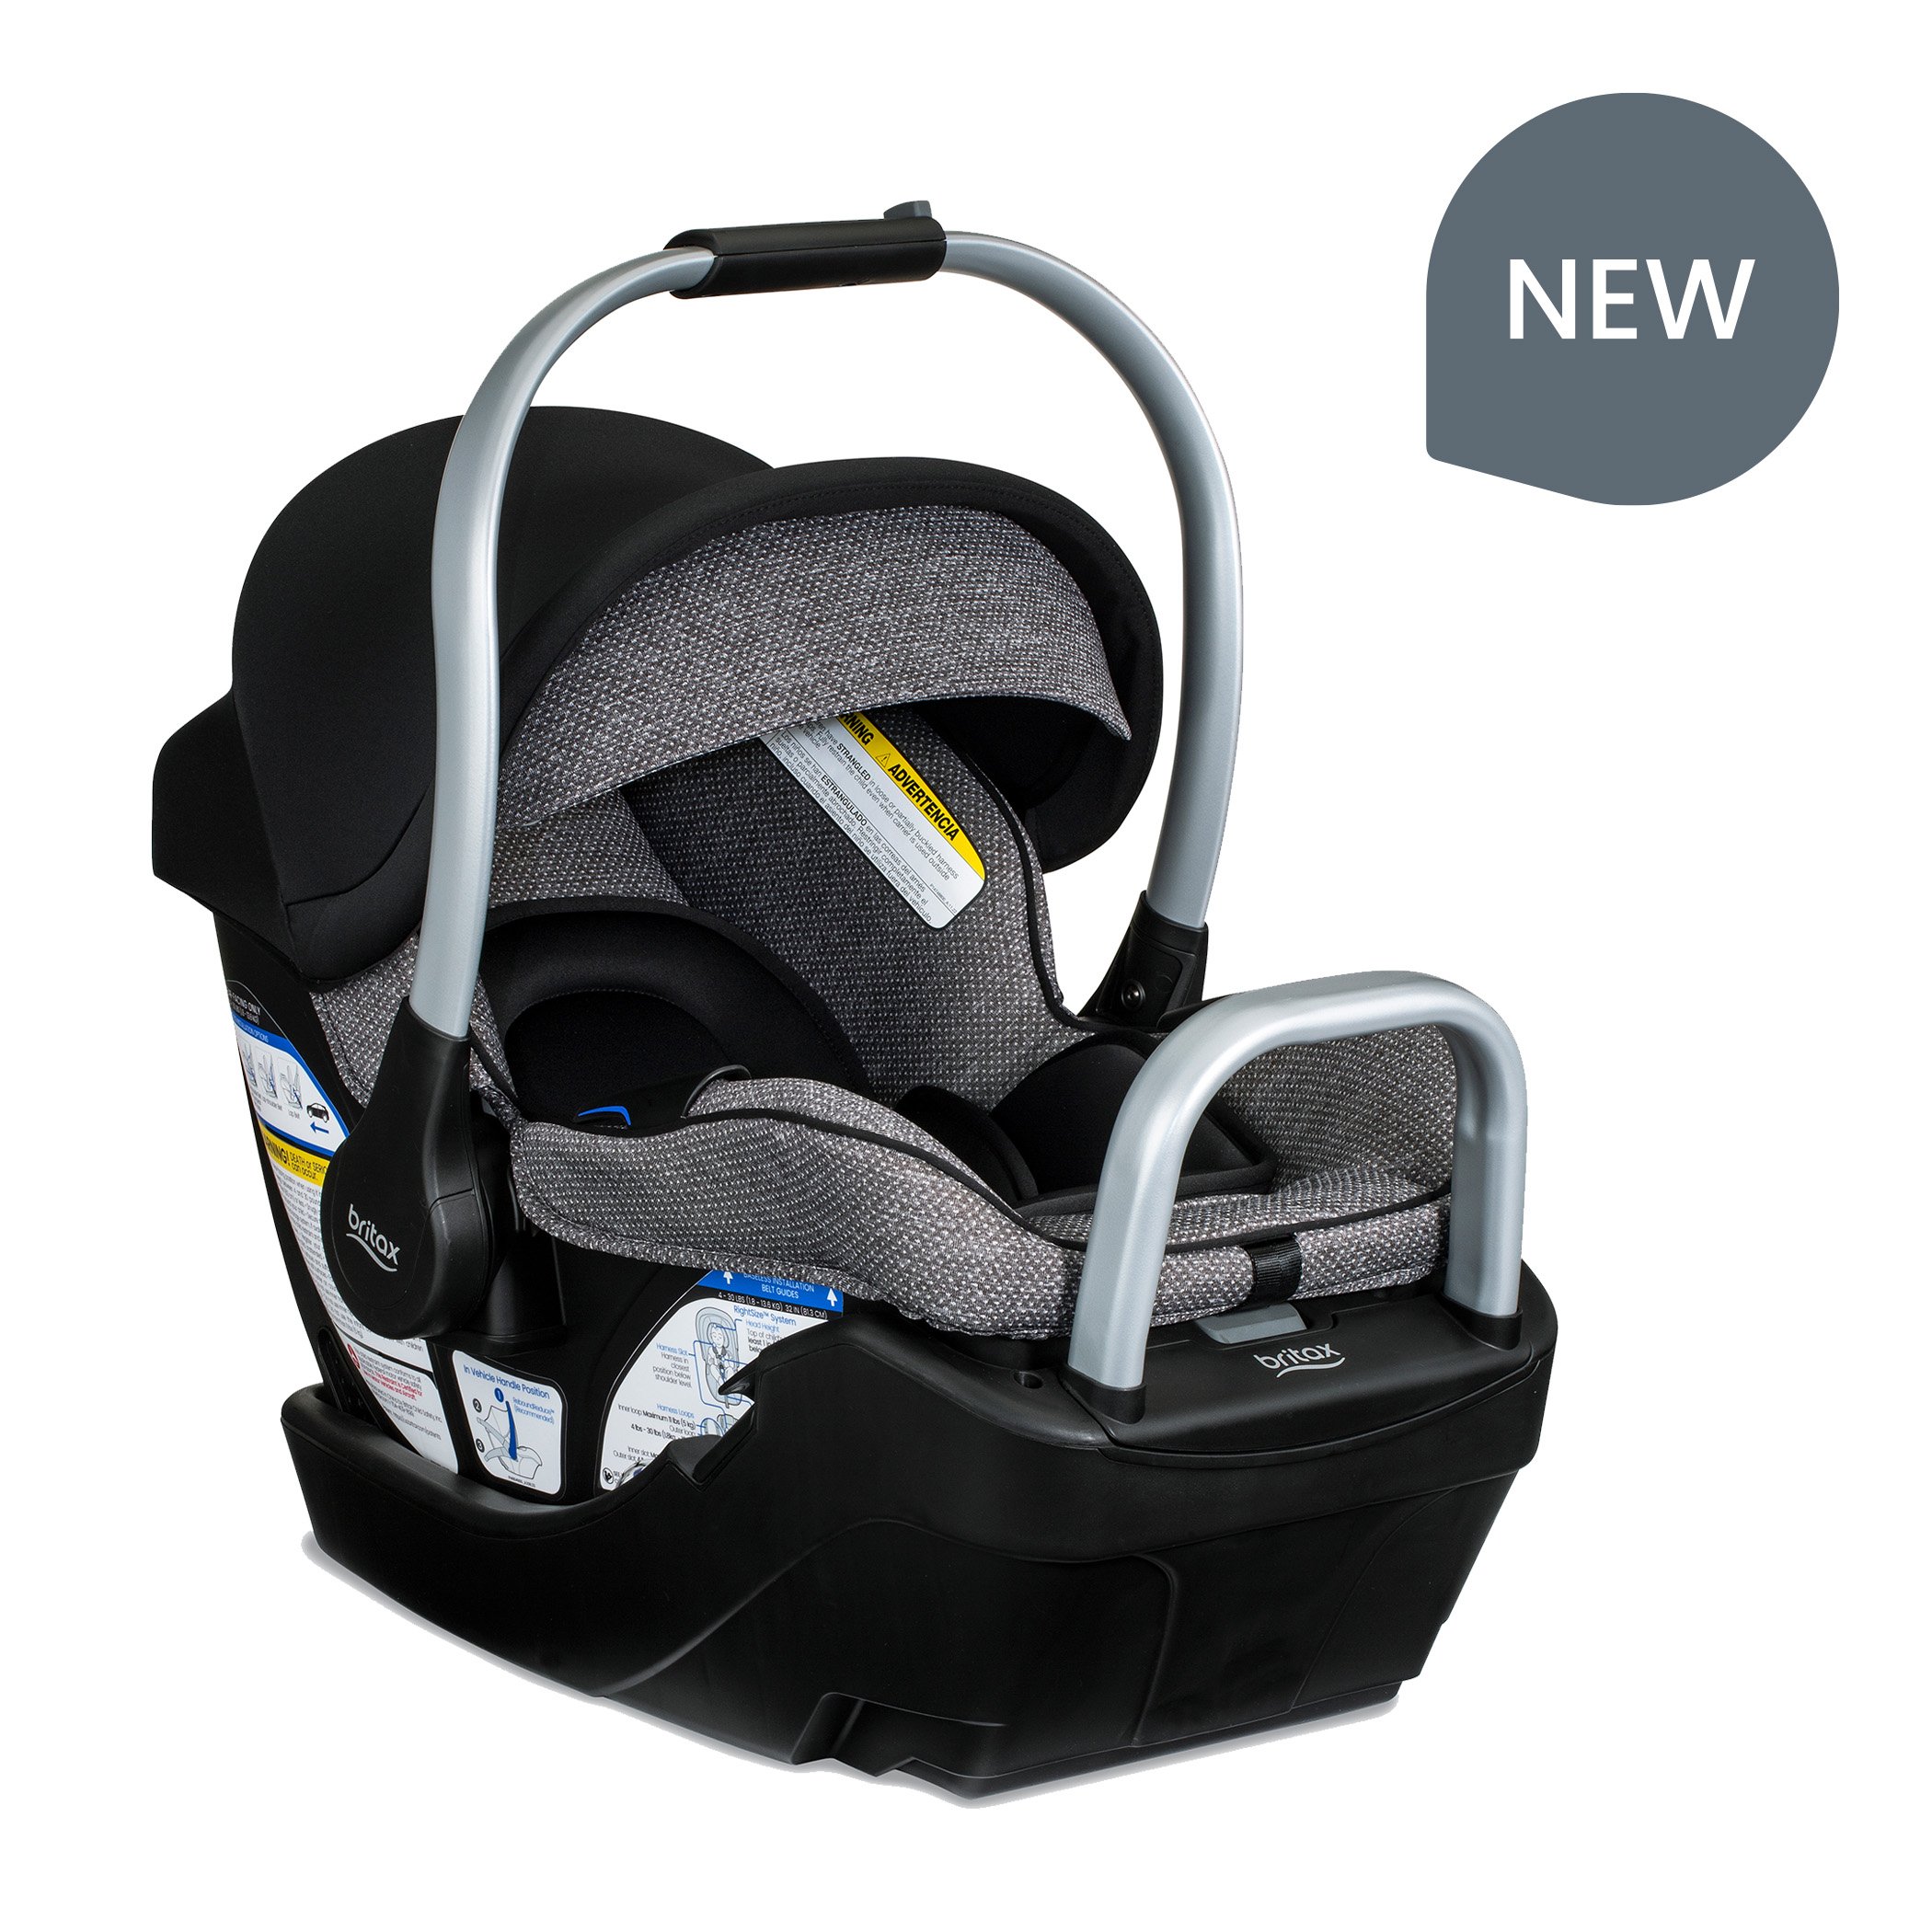  NEW Pindot Onyx Willow S Infant Car Seat 